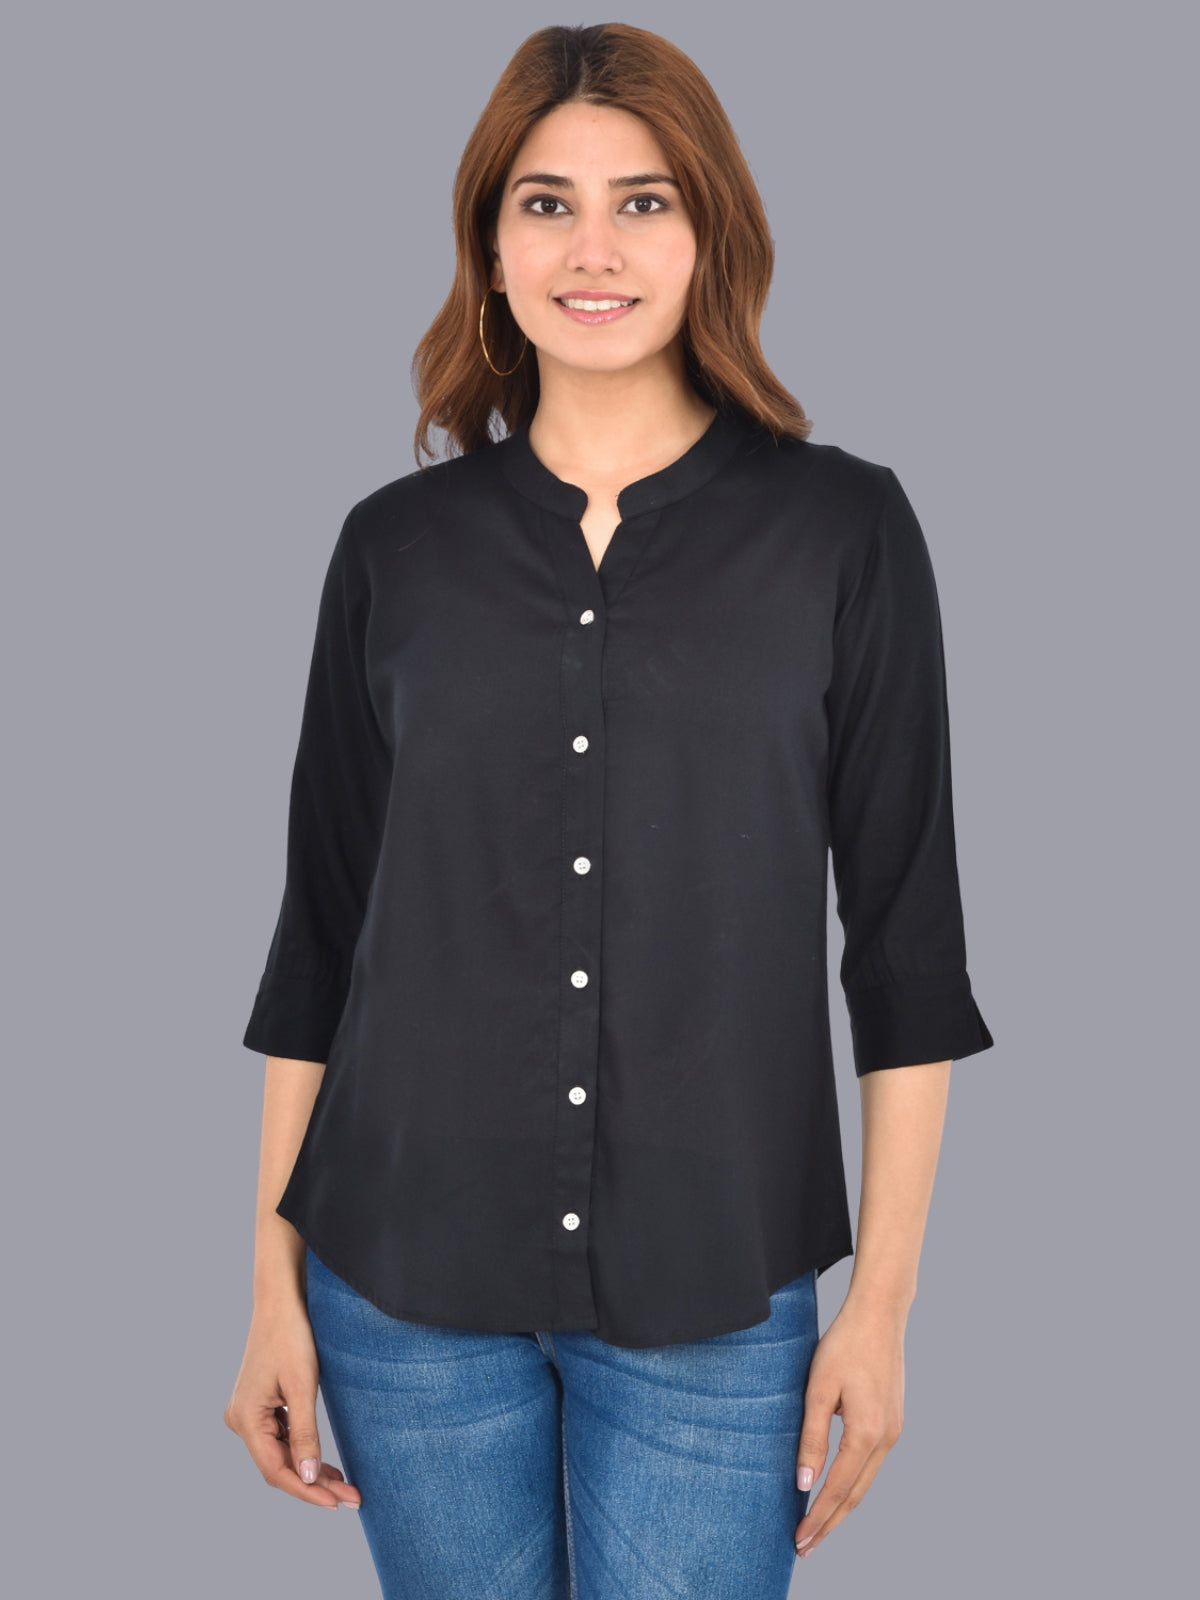 Pack Of 2 Womens Solid Black and Peach Rayon Chinese Collar Shirts Combo